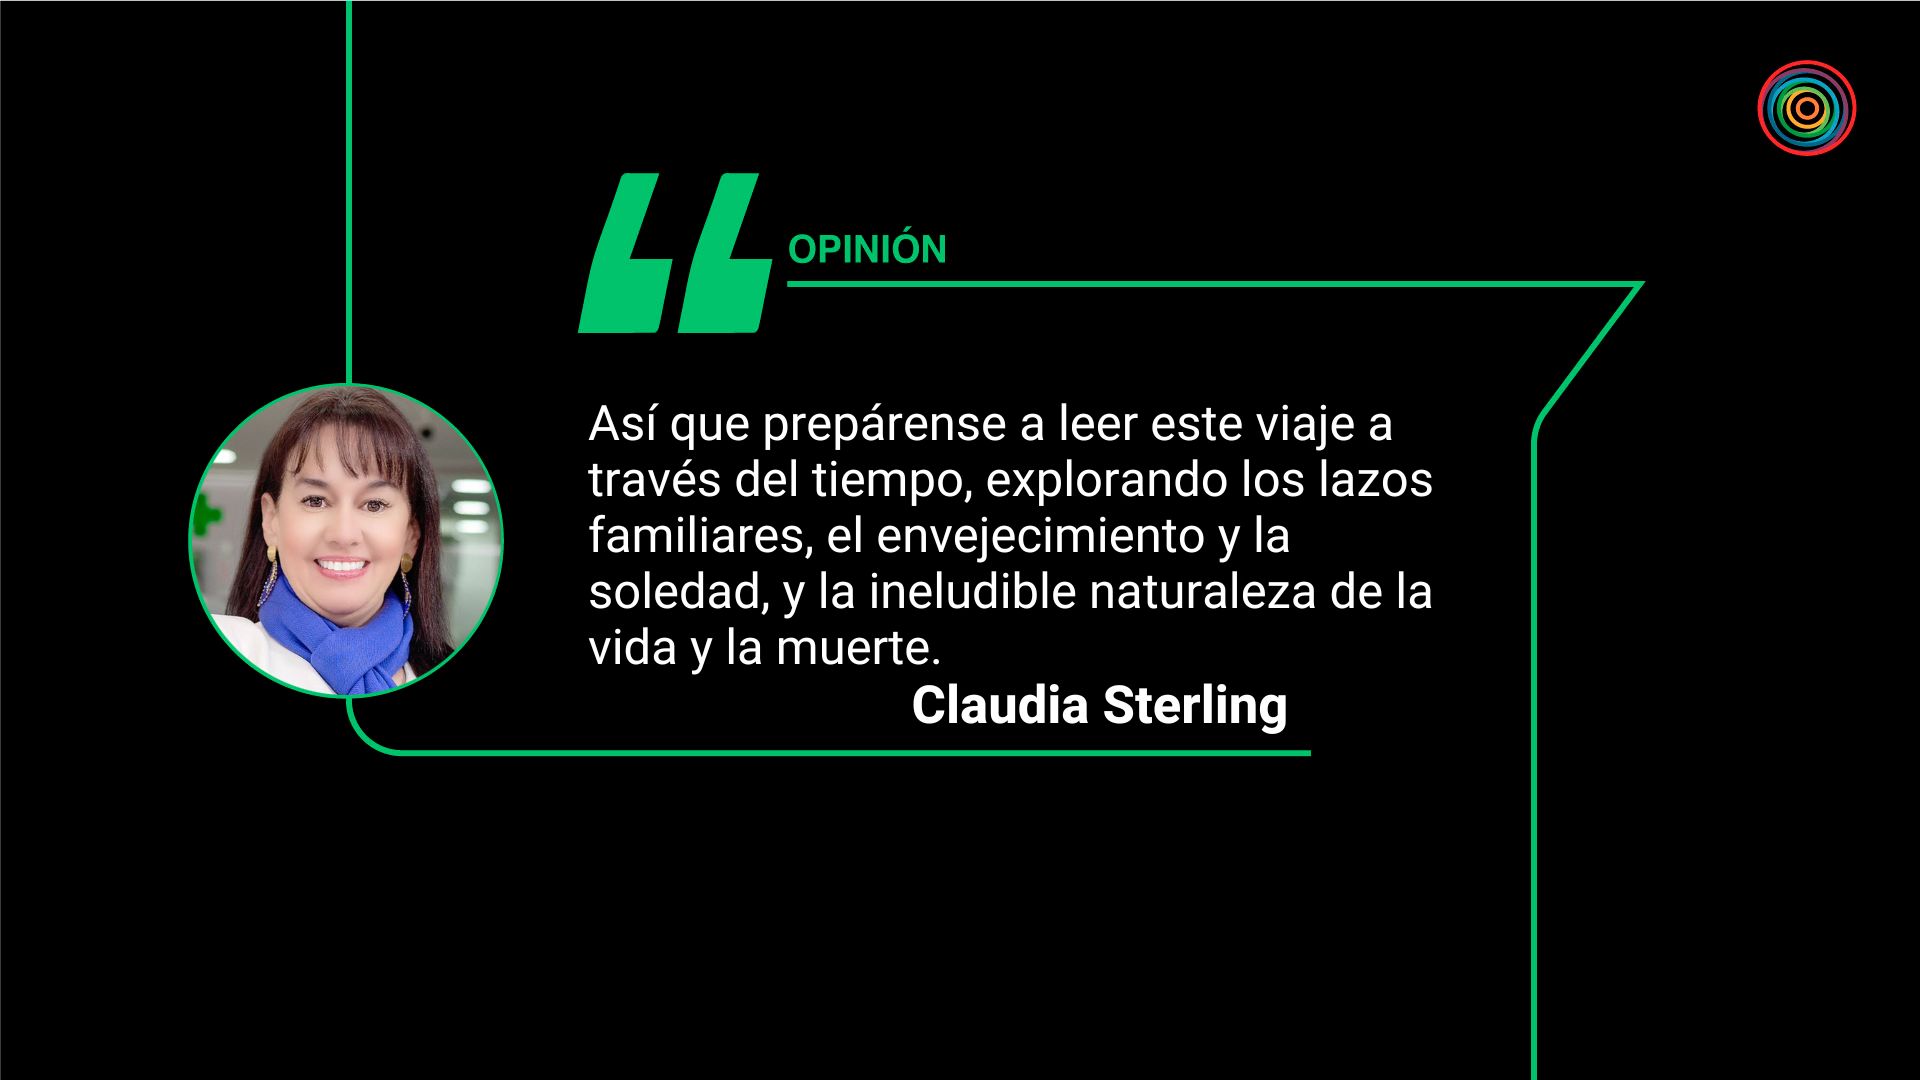 Claudia Sterling